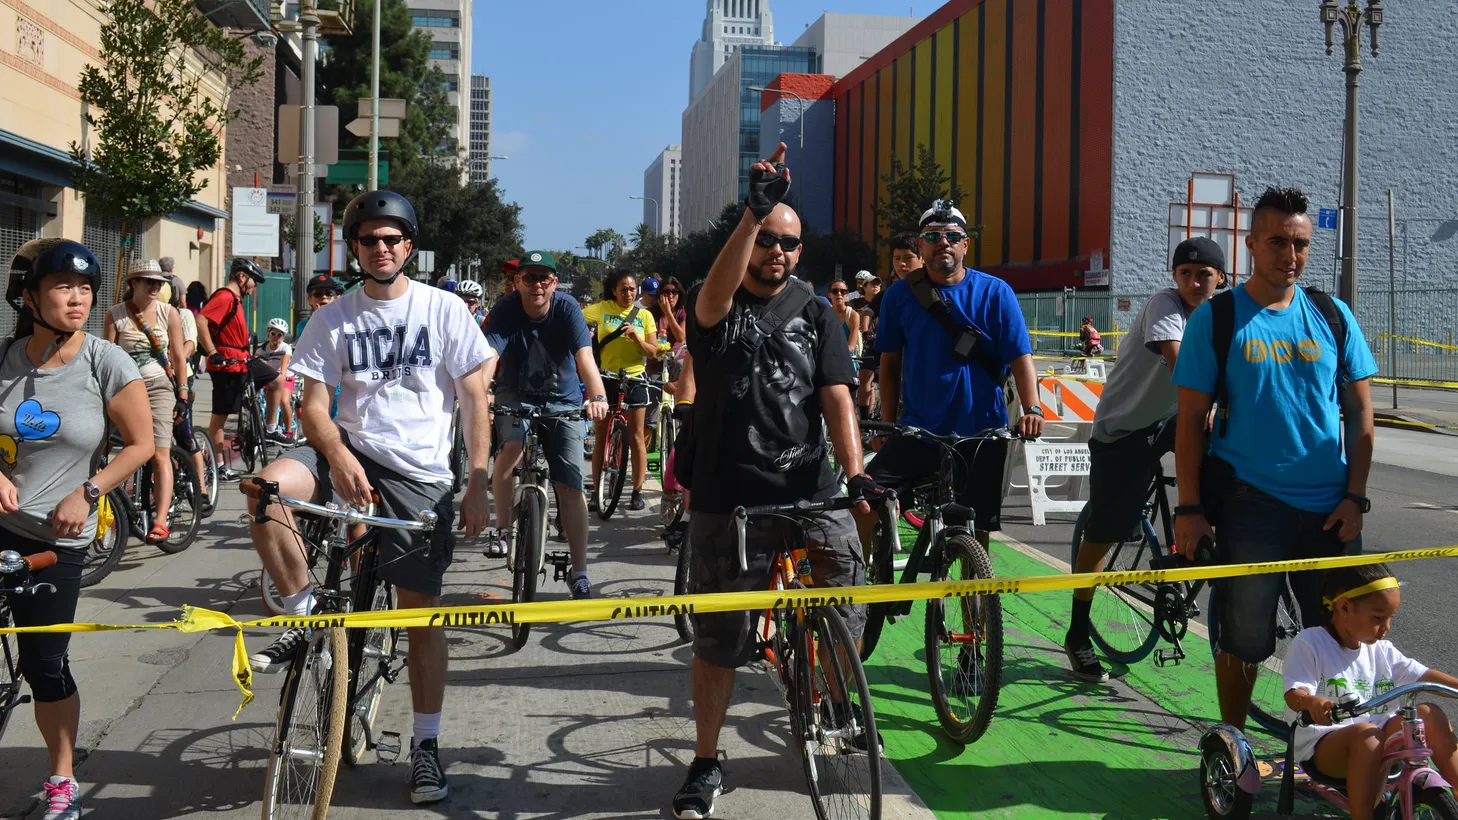 This Sunday from 9 a.m. to 4 p.m., CicLAvia will close seven miles of roads to cars. Bikers, runners, skateboarders and others can enjoy the route that goes through Echo Park, Chinatown, Little Tokyo, and Boyle Heights.